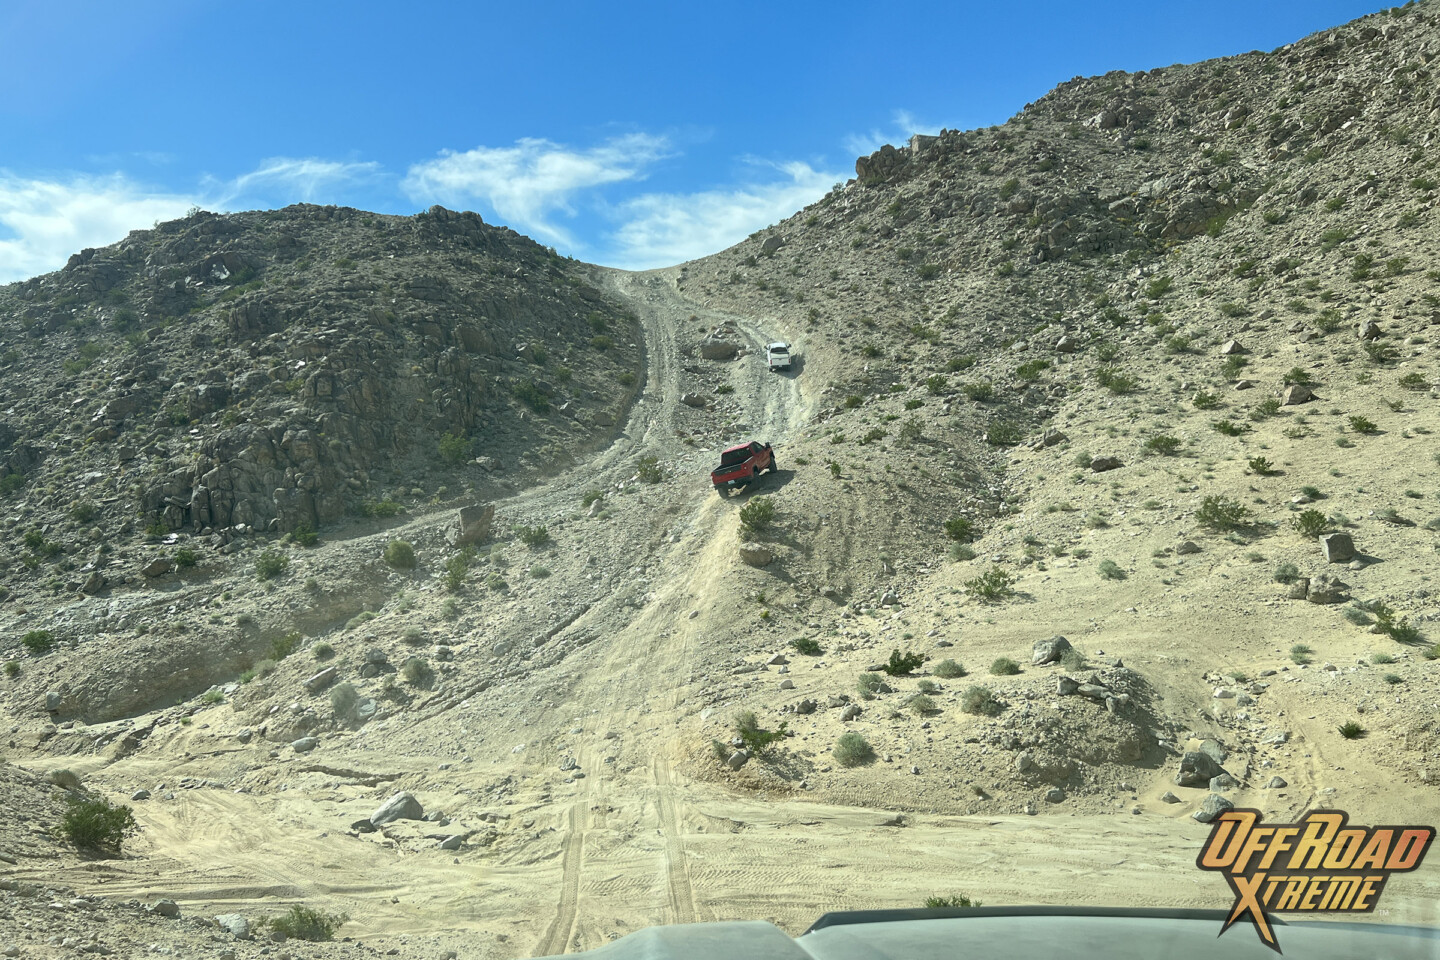 Driving New Chevrolet ZR2 Trucks Through King Of The Hammers